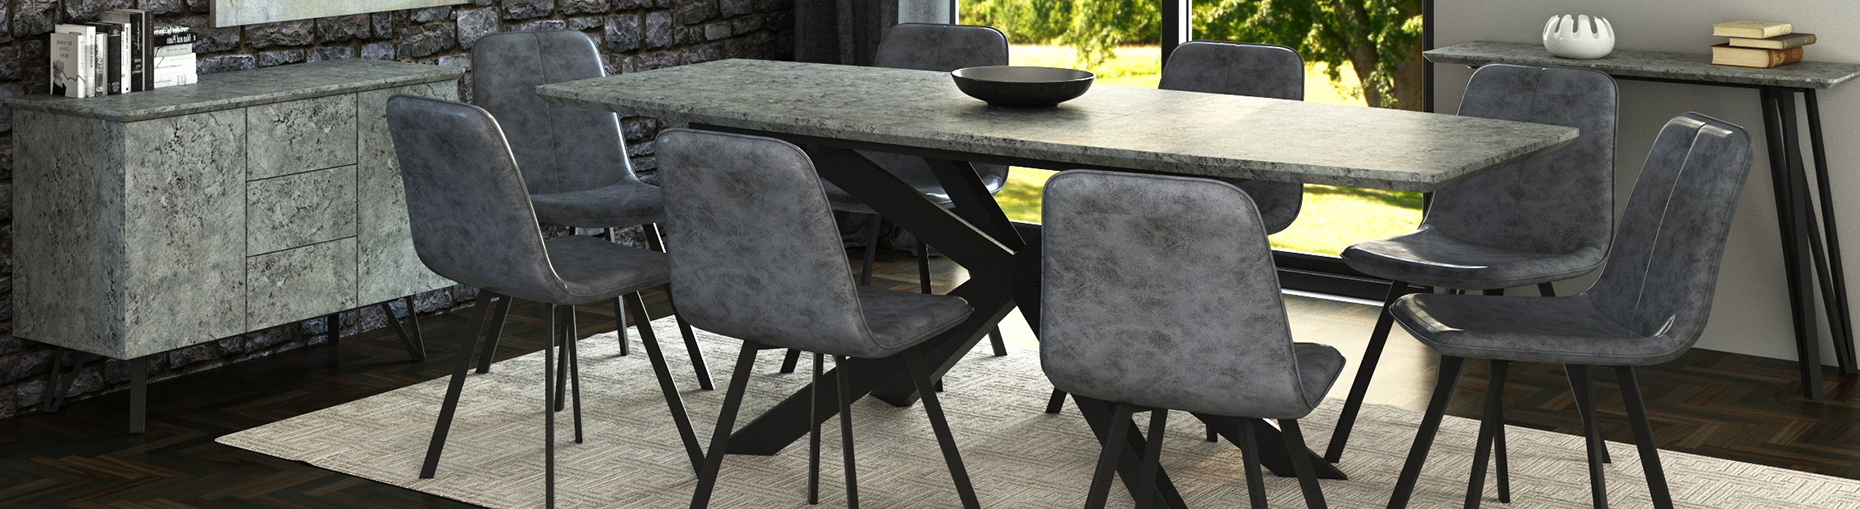 Maison dining collection at Forrest Furnishing